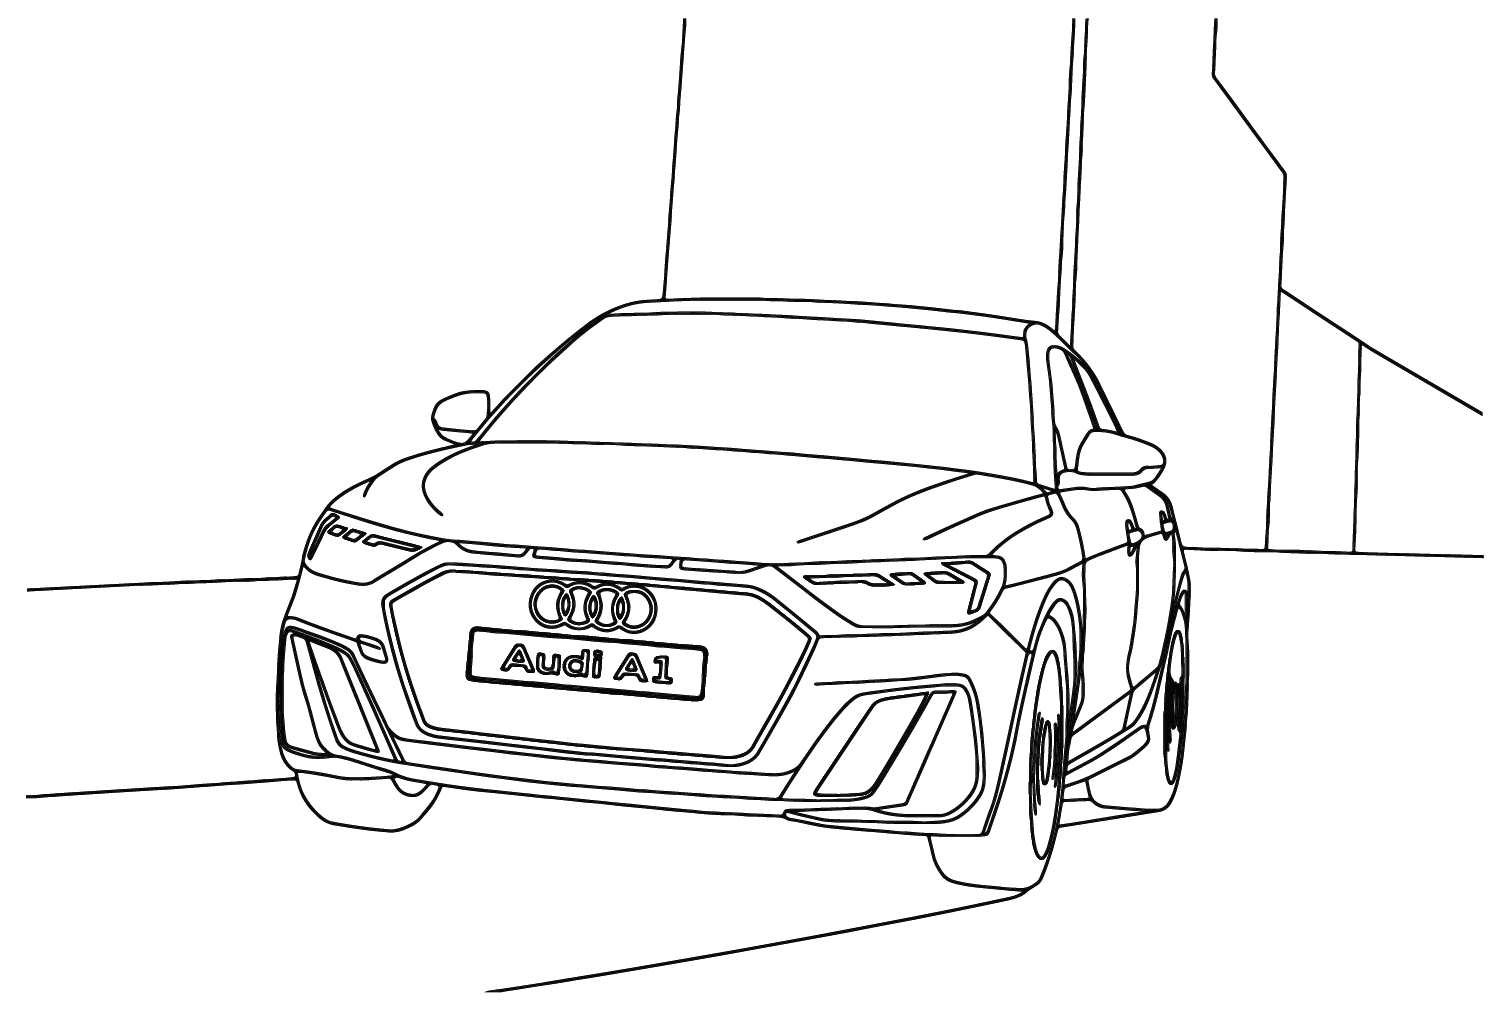 Audi A1 Coloring Page from Audi